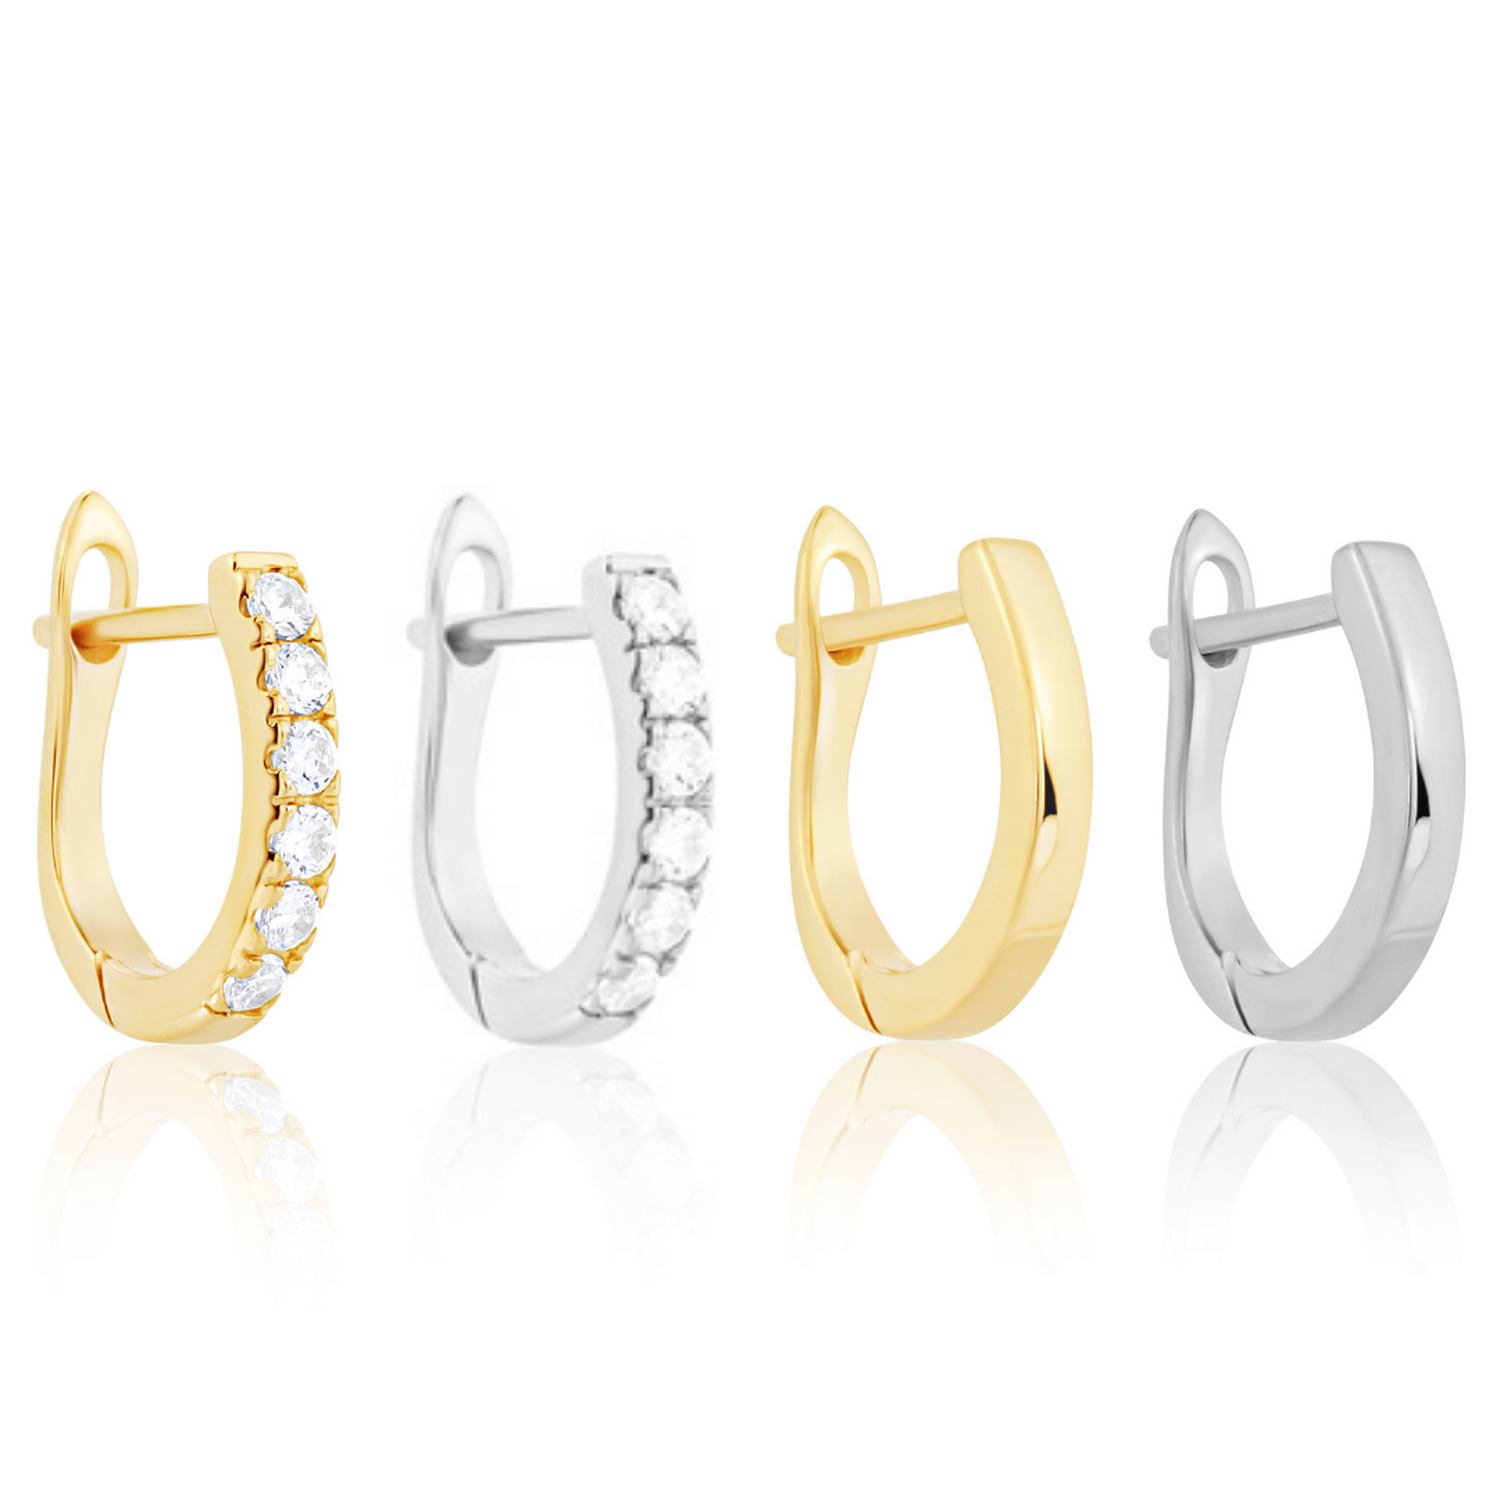 The Gold and Silver Leverback Hoops